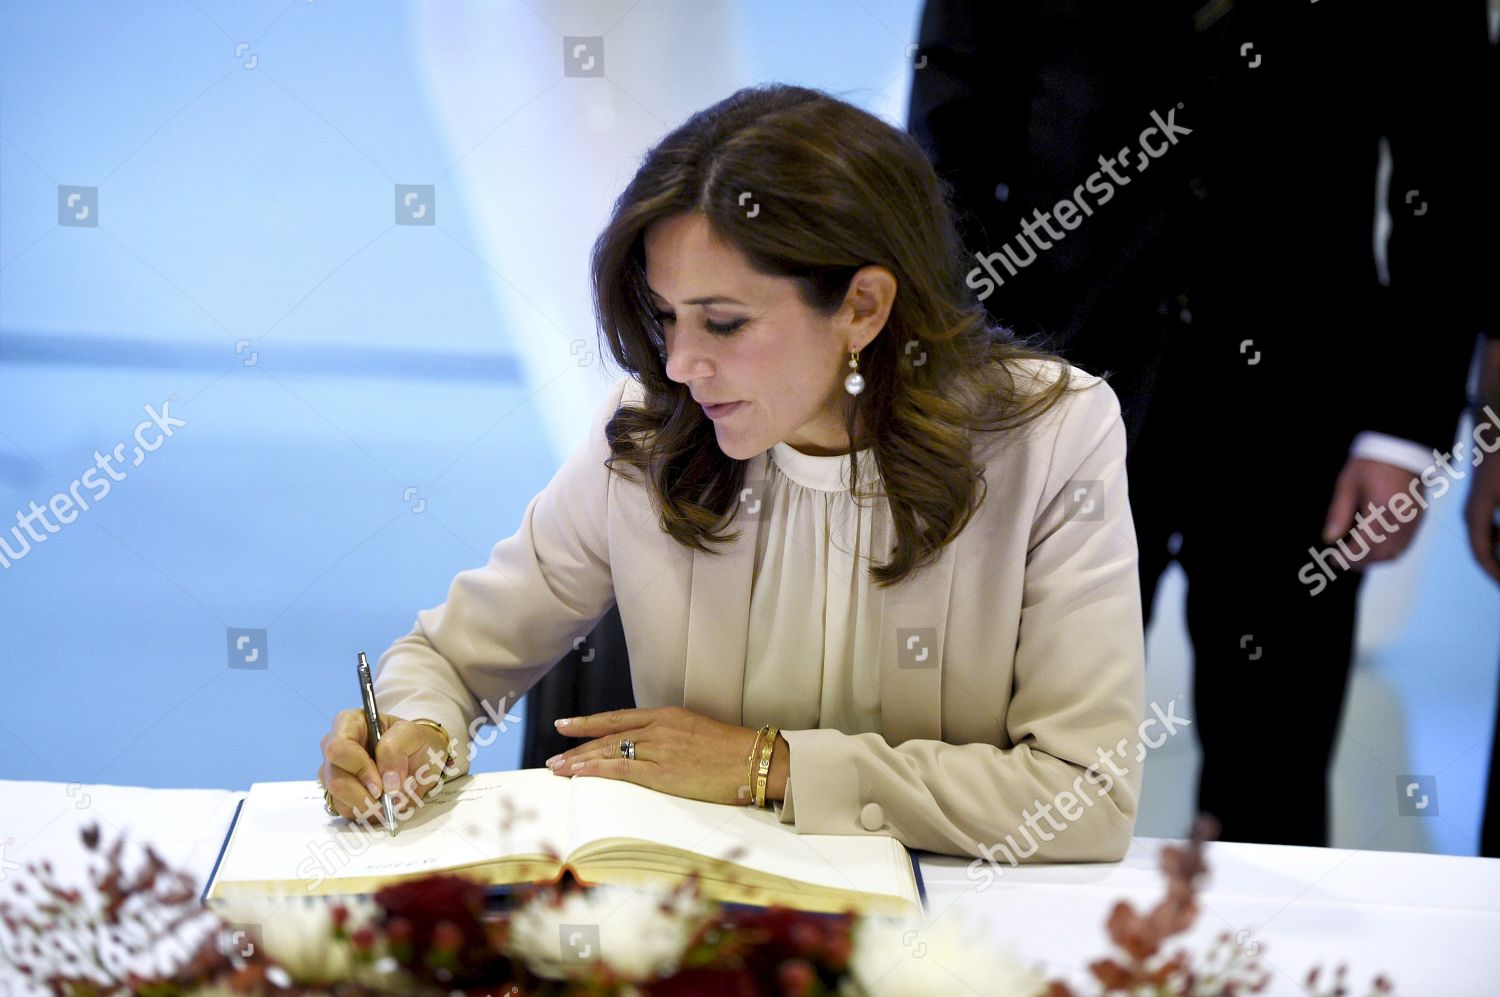 crown-princess-mary-visit-to-finland-shutterstock-editorial-9881096i.jpg